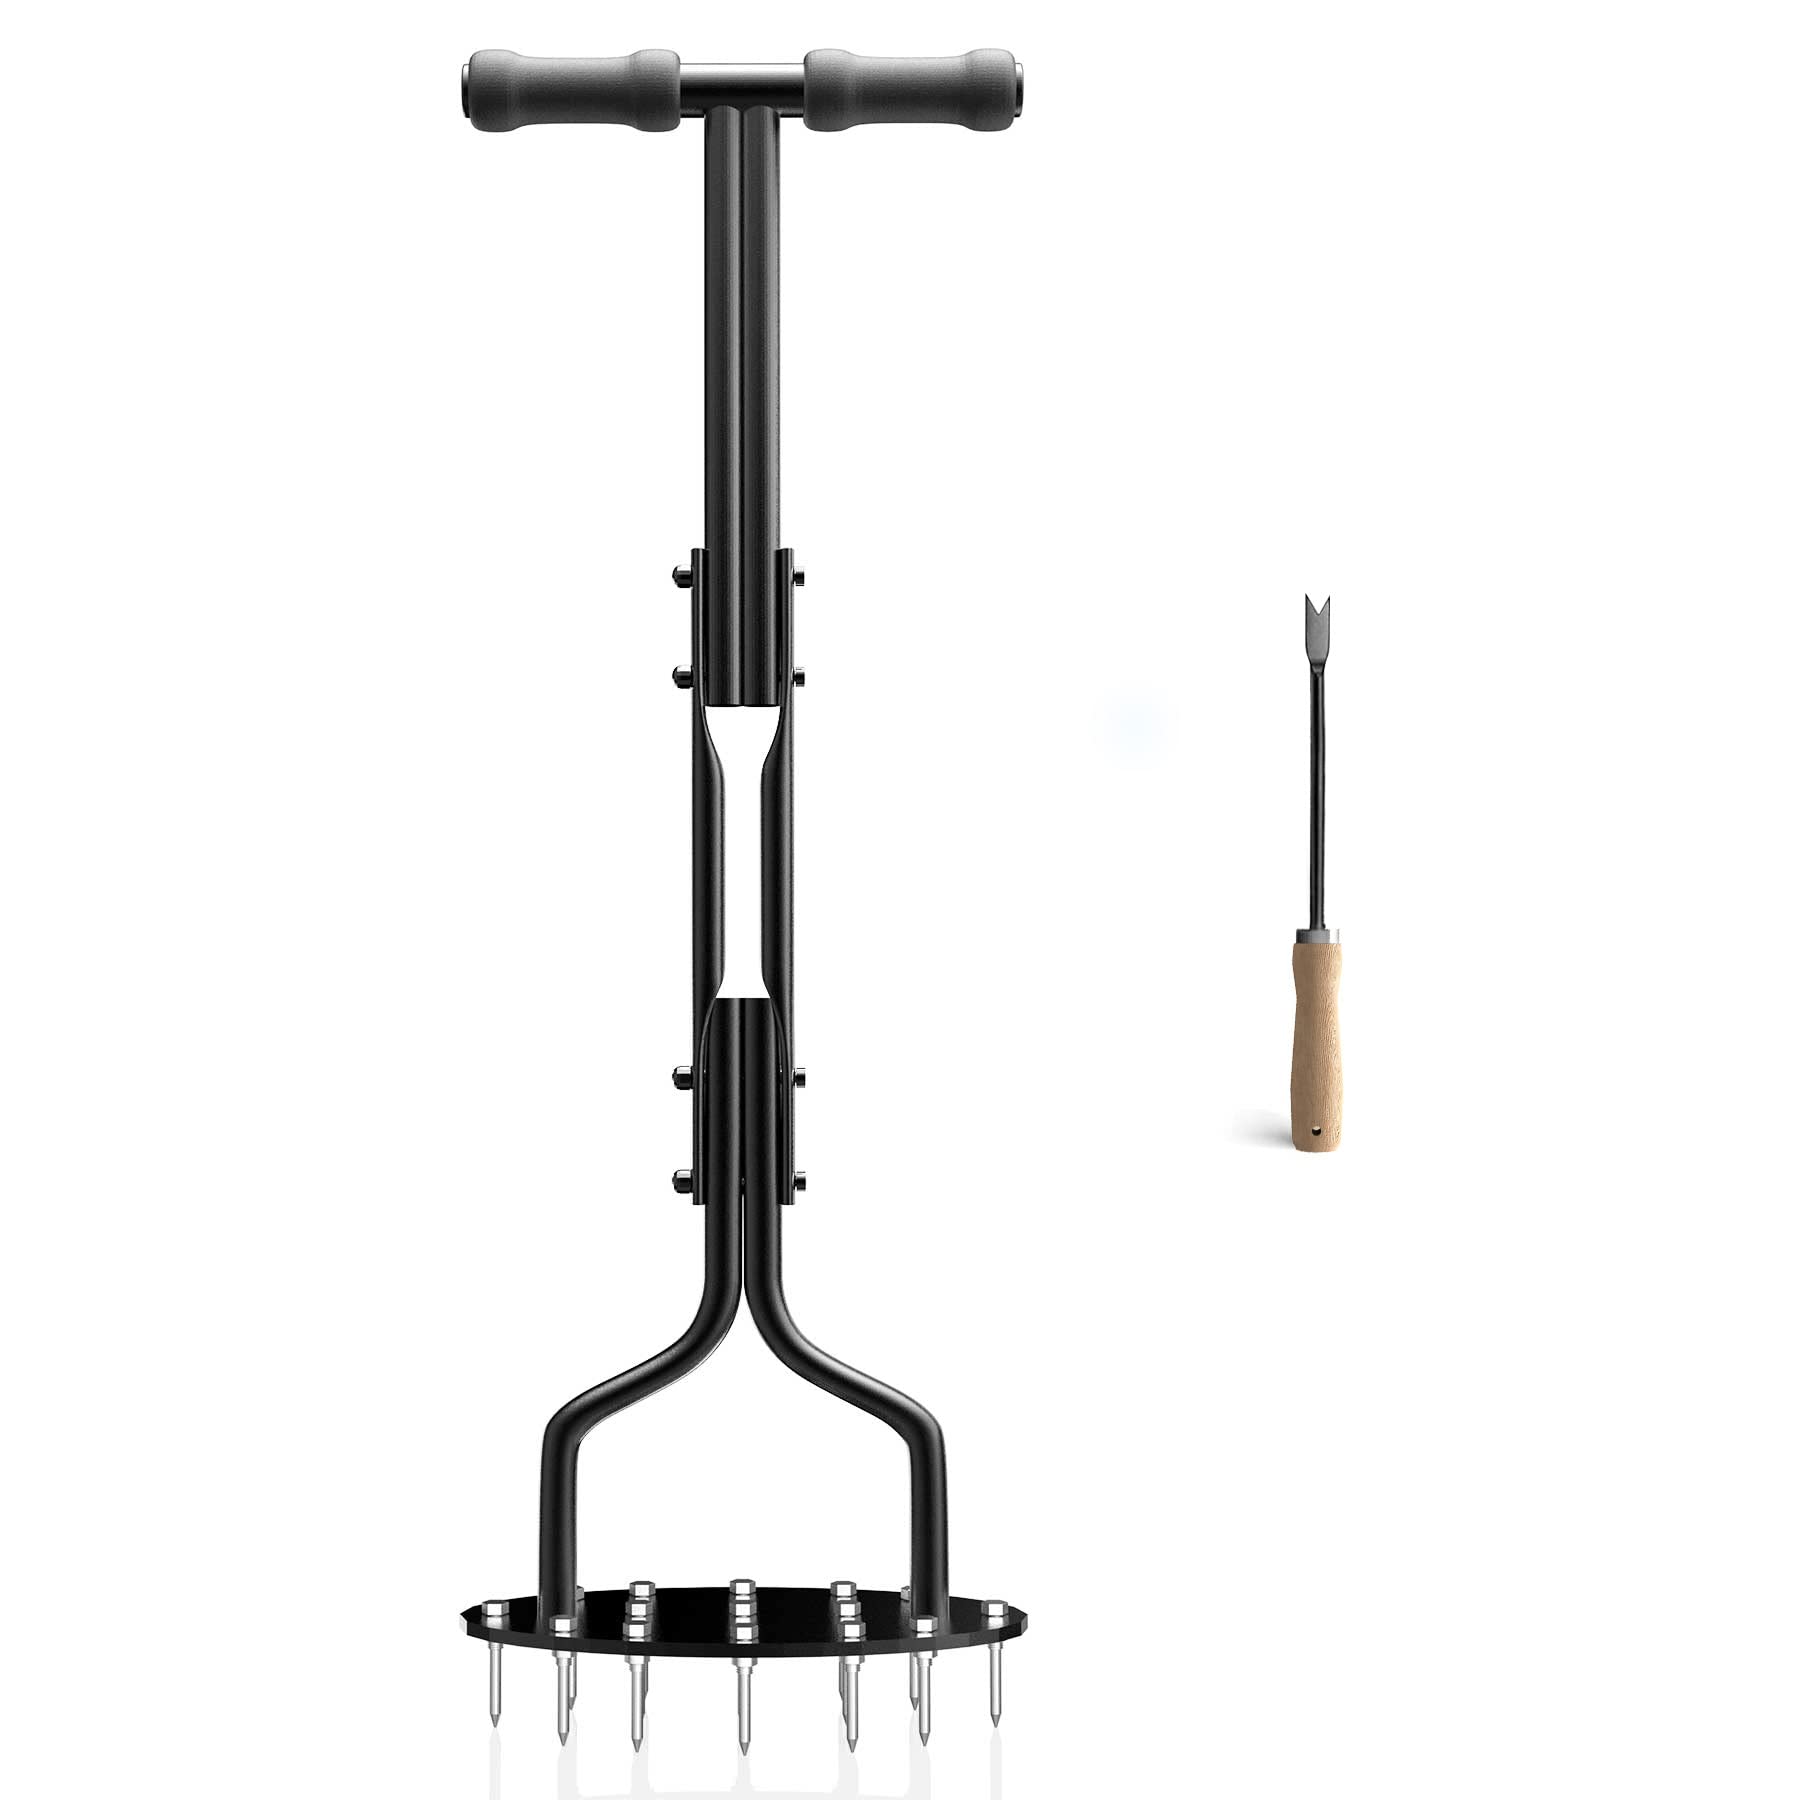 EEIEER Lawn Aerator Spikes Aerating Tool, Manual Aeration Tools with 15 Spikes, Yard Aerators with Cleaning Weeder Tool for Compacted Soil & Lawns Garden